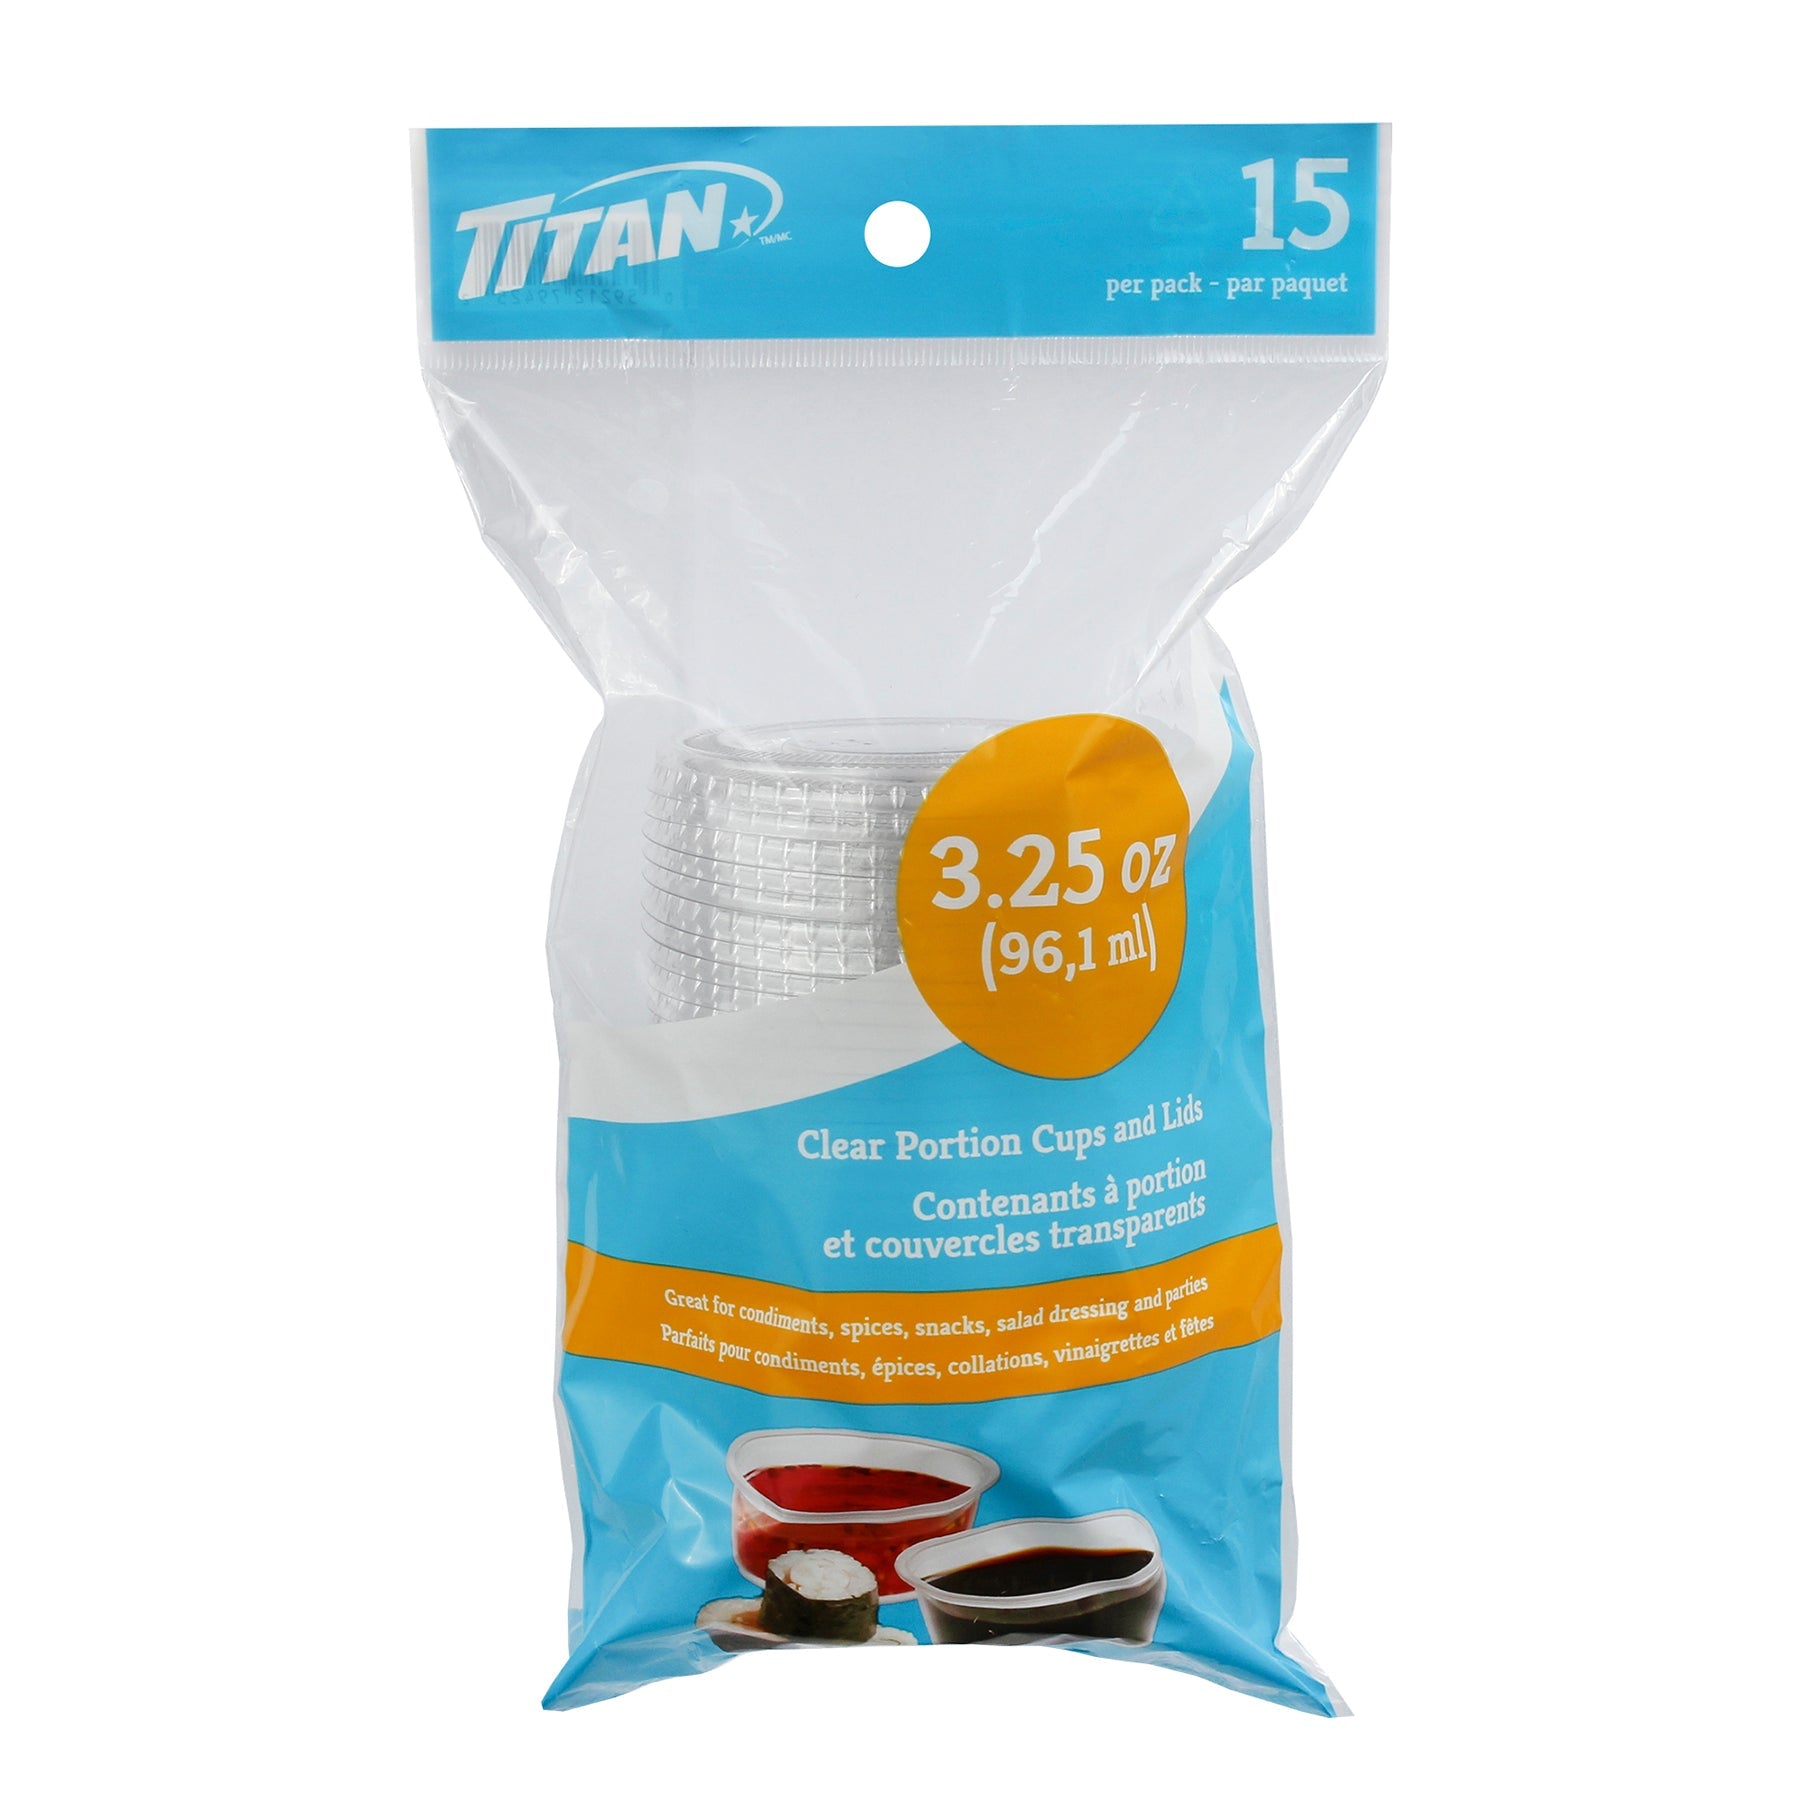 Titan 15 Portion Cups and Lid Clear Plastic 3.25oz